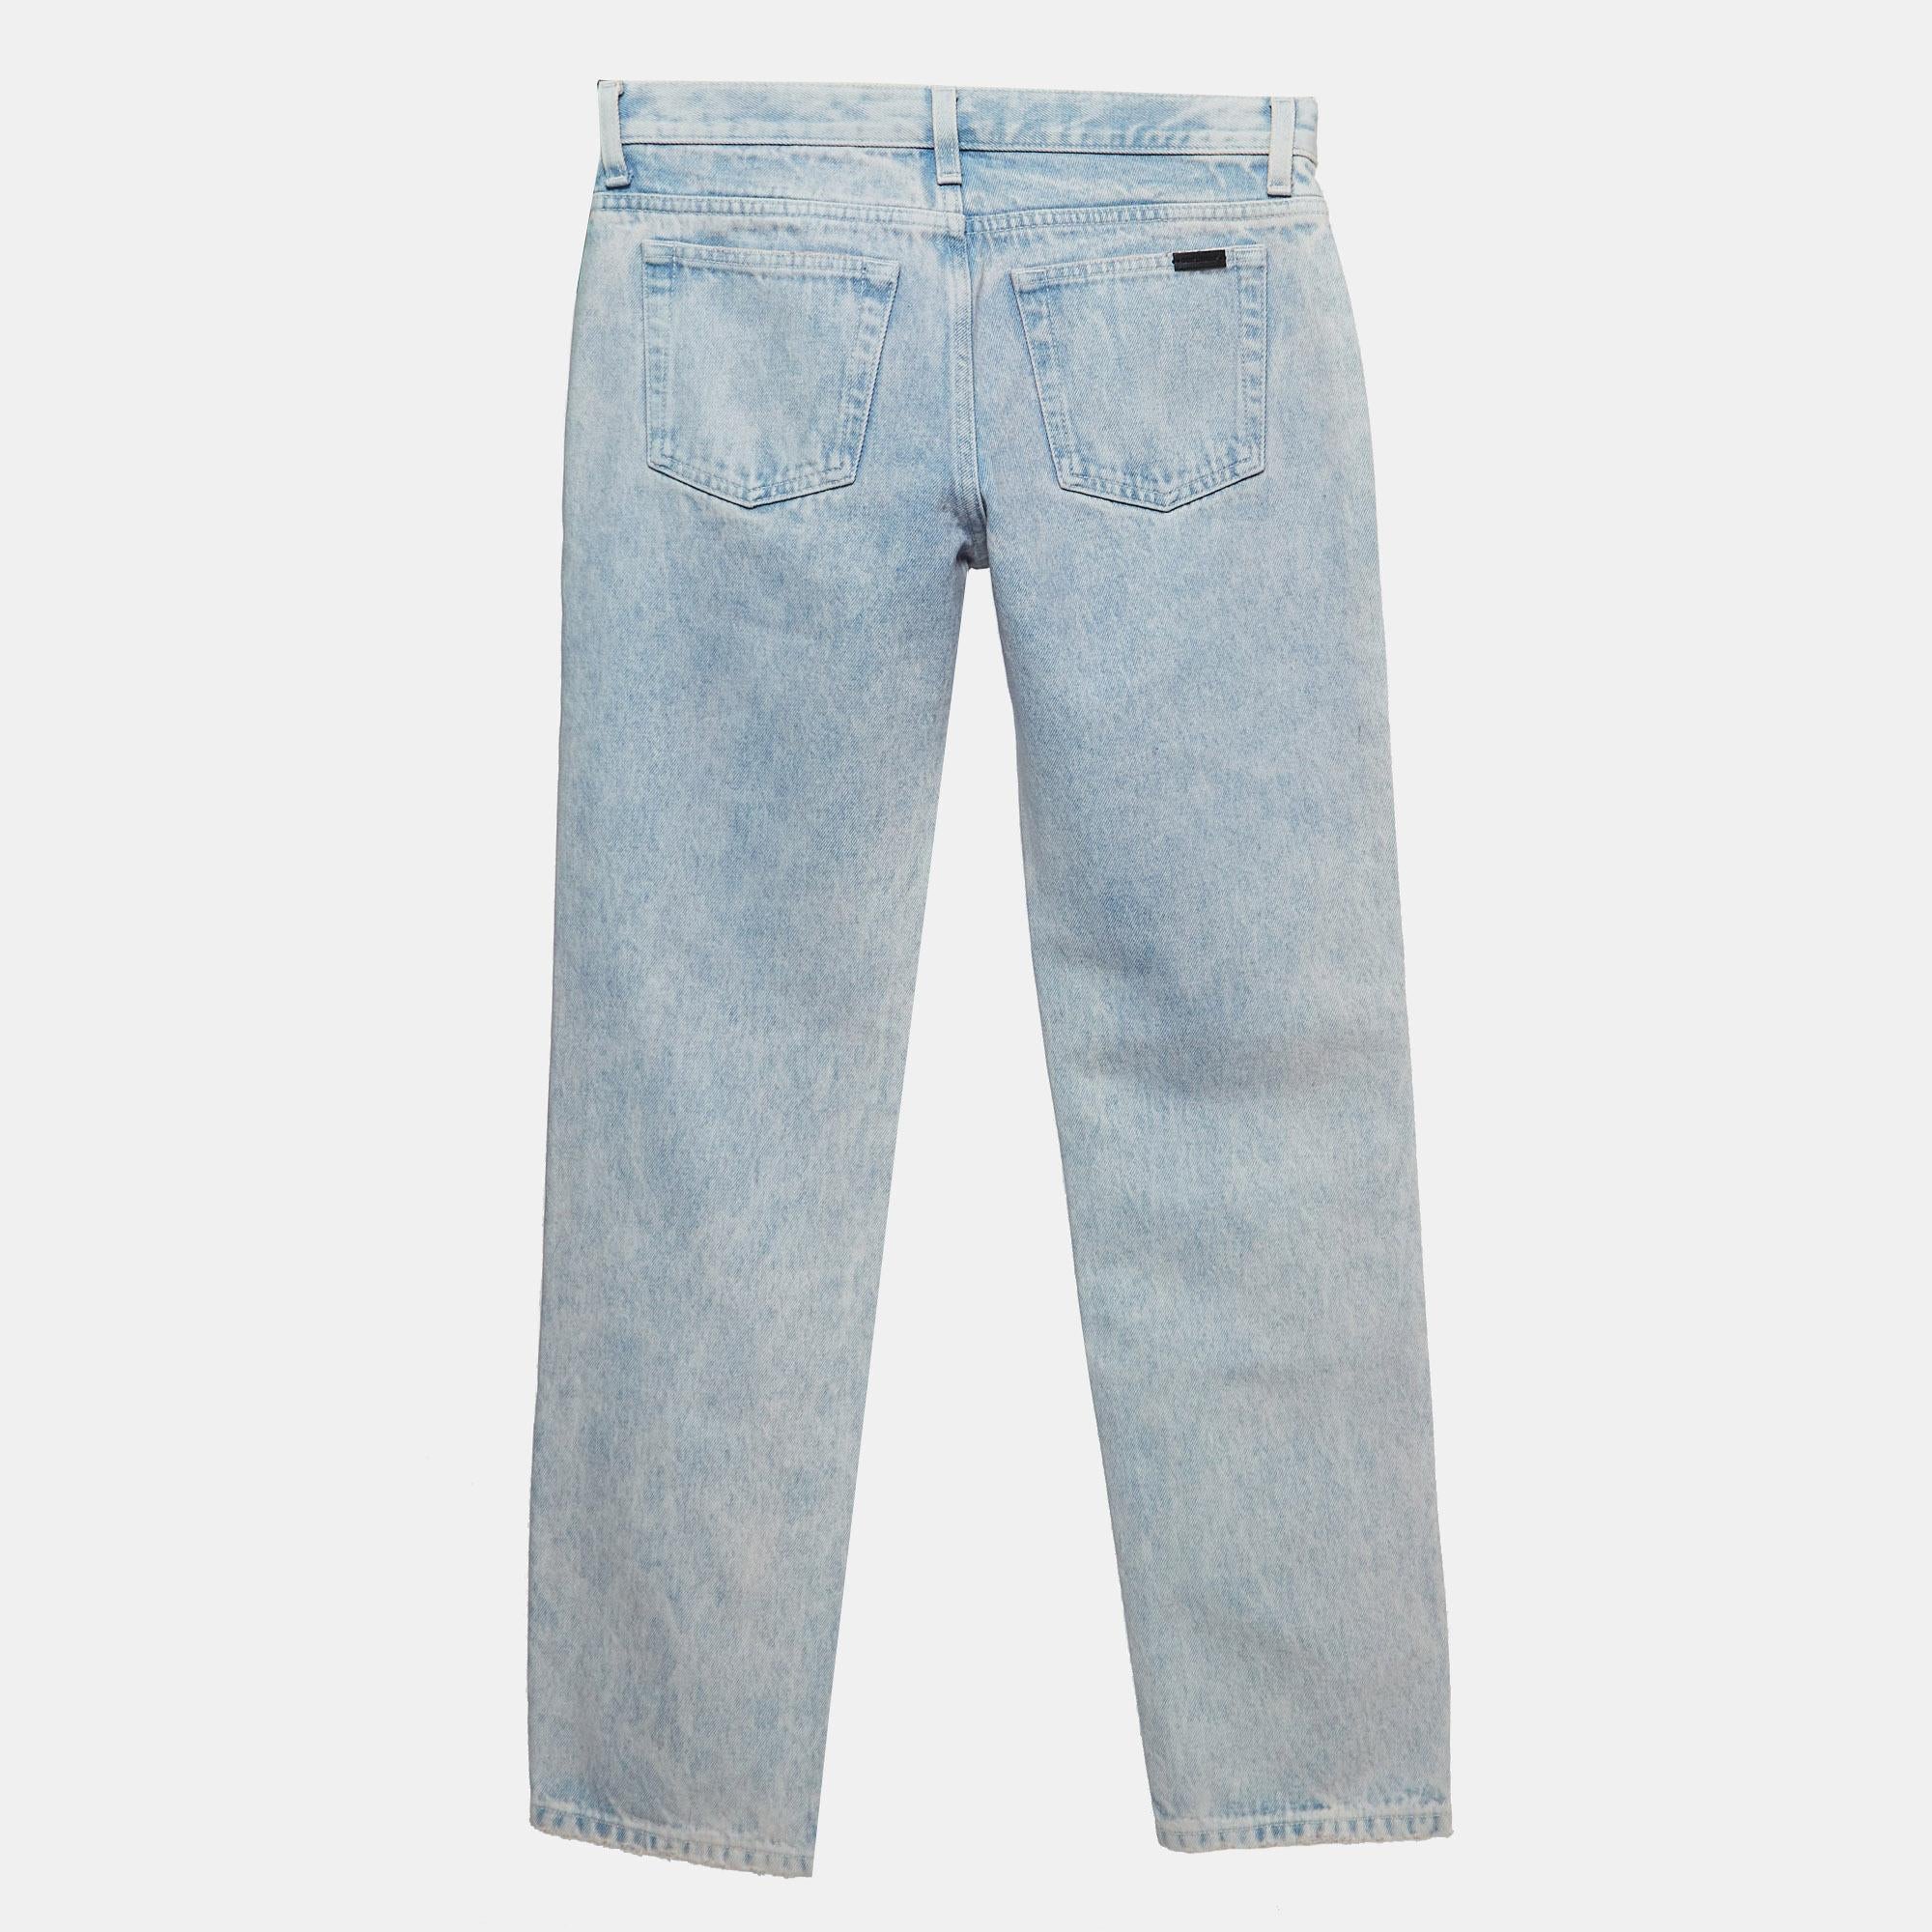 A good pair of jeans always makes the closet complete. This pair of jeans is tailored with such skill and style that it will be your favorite in no time. It will give you a comfortable, stylish fit.

Includes: Brand Tag